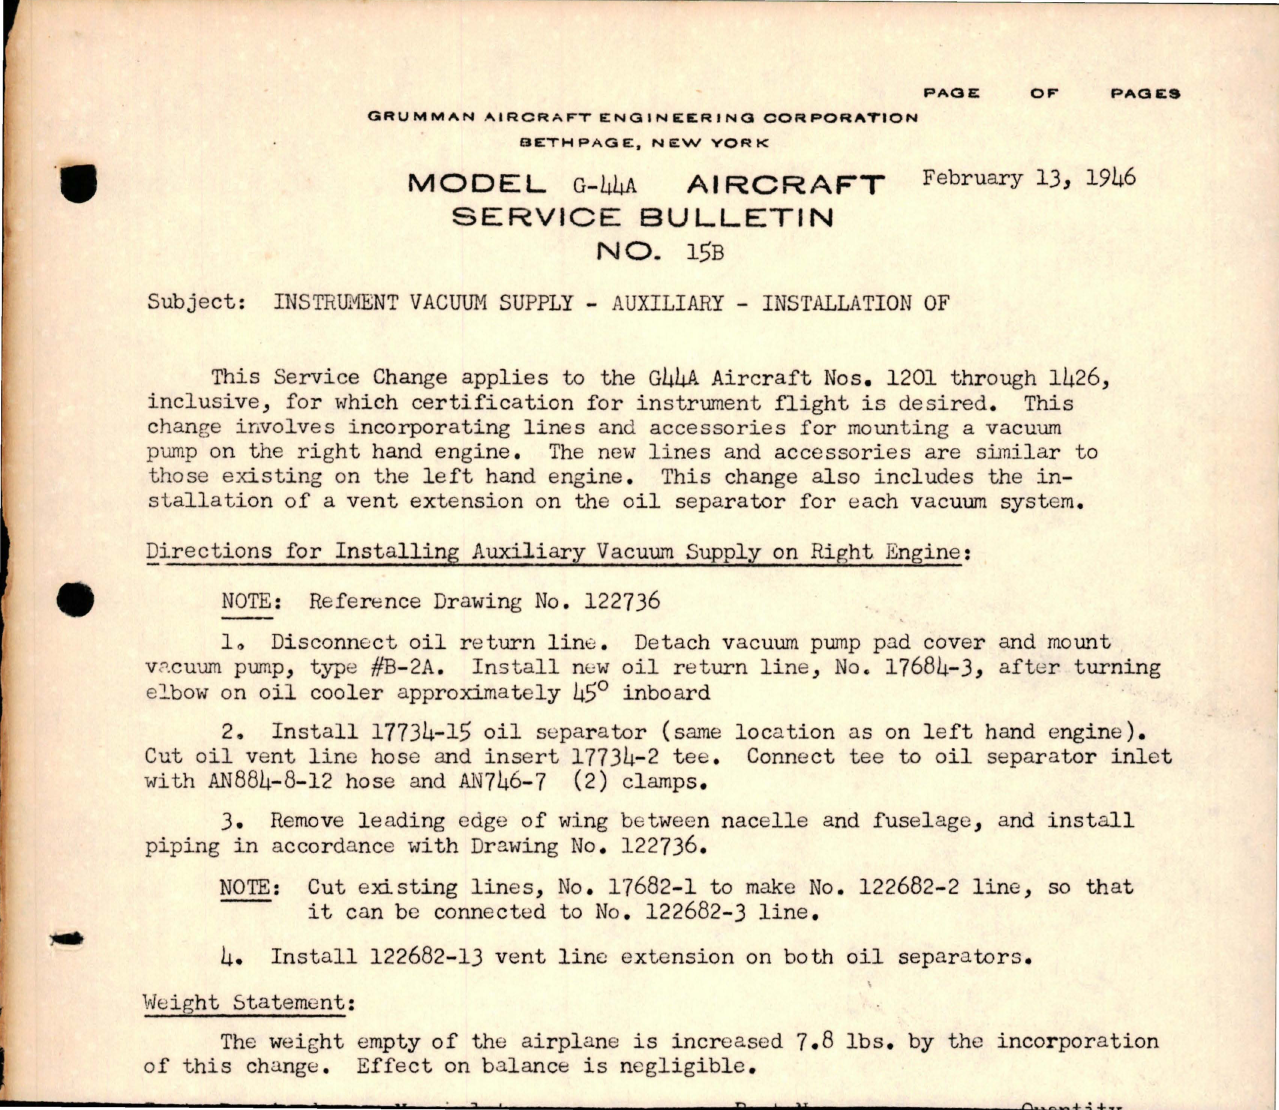 Sample page 1 from AirCorps Library document: Installation of Instrument Vacuum Supply - Auxiliary - Model G-44A